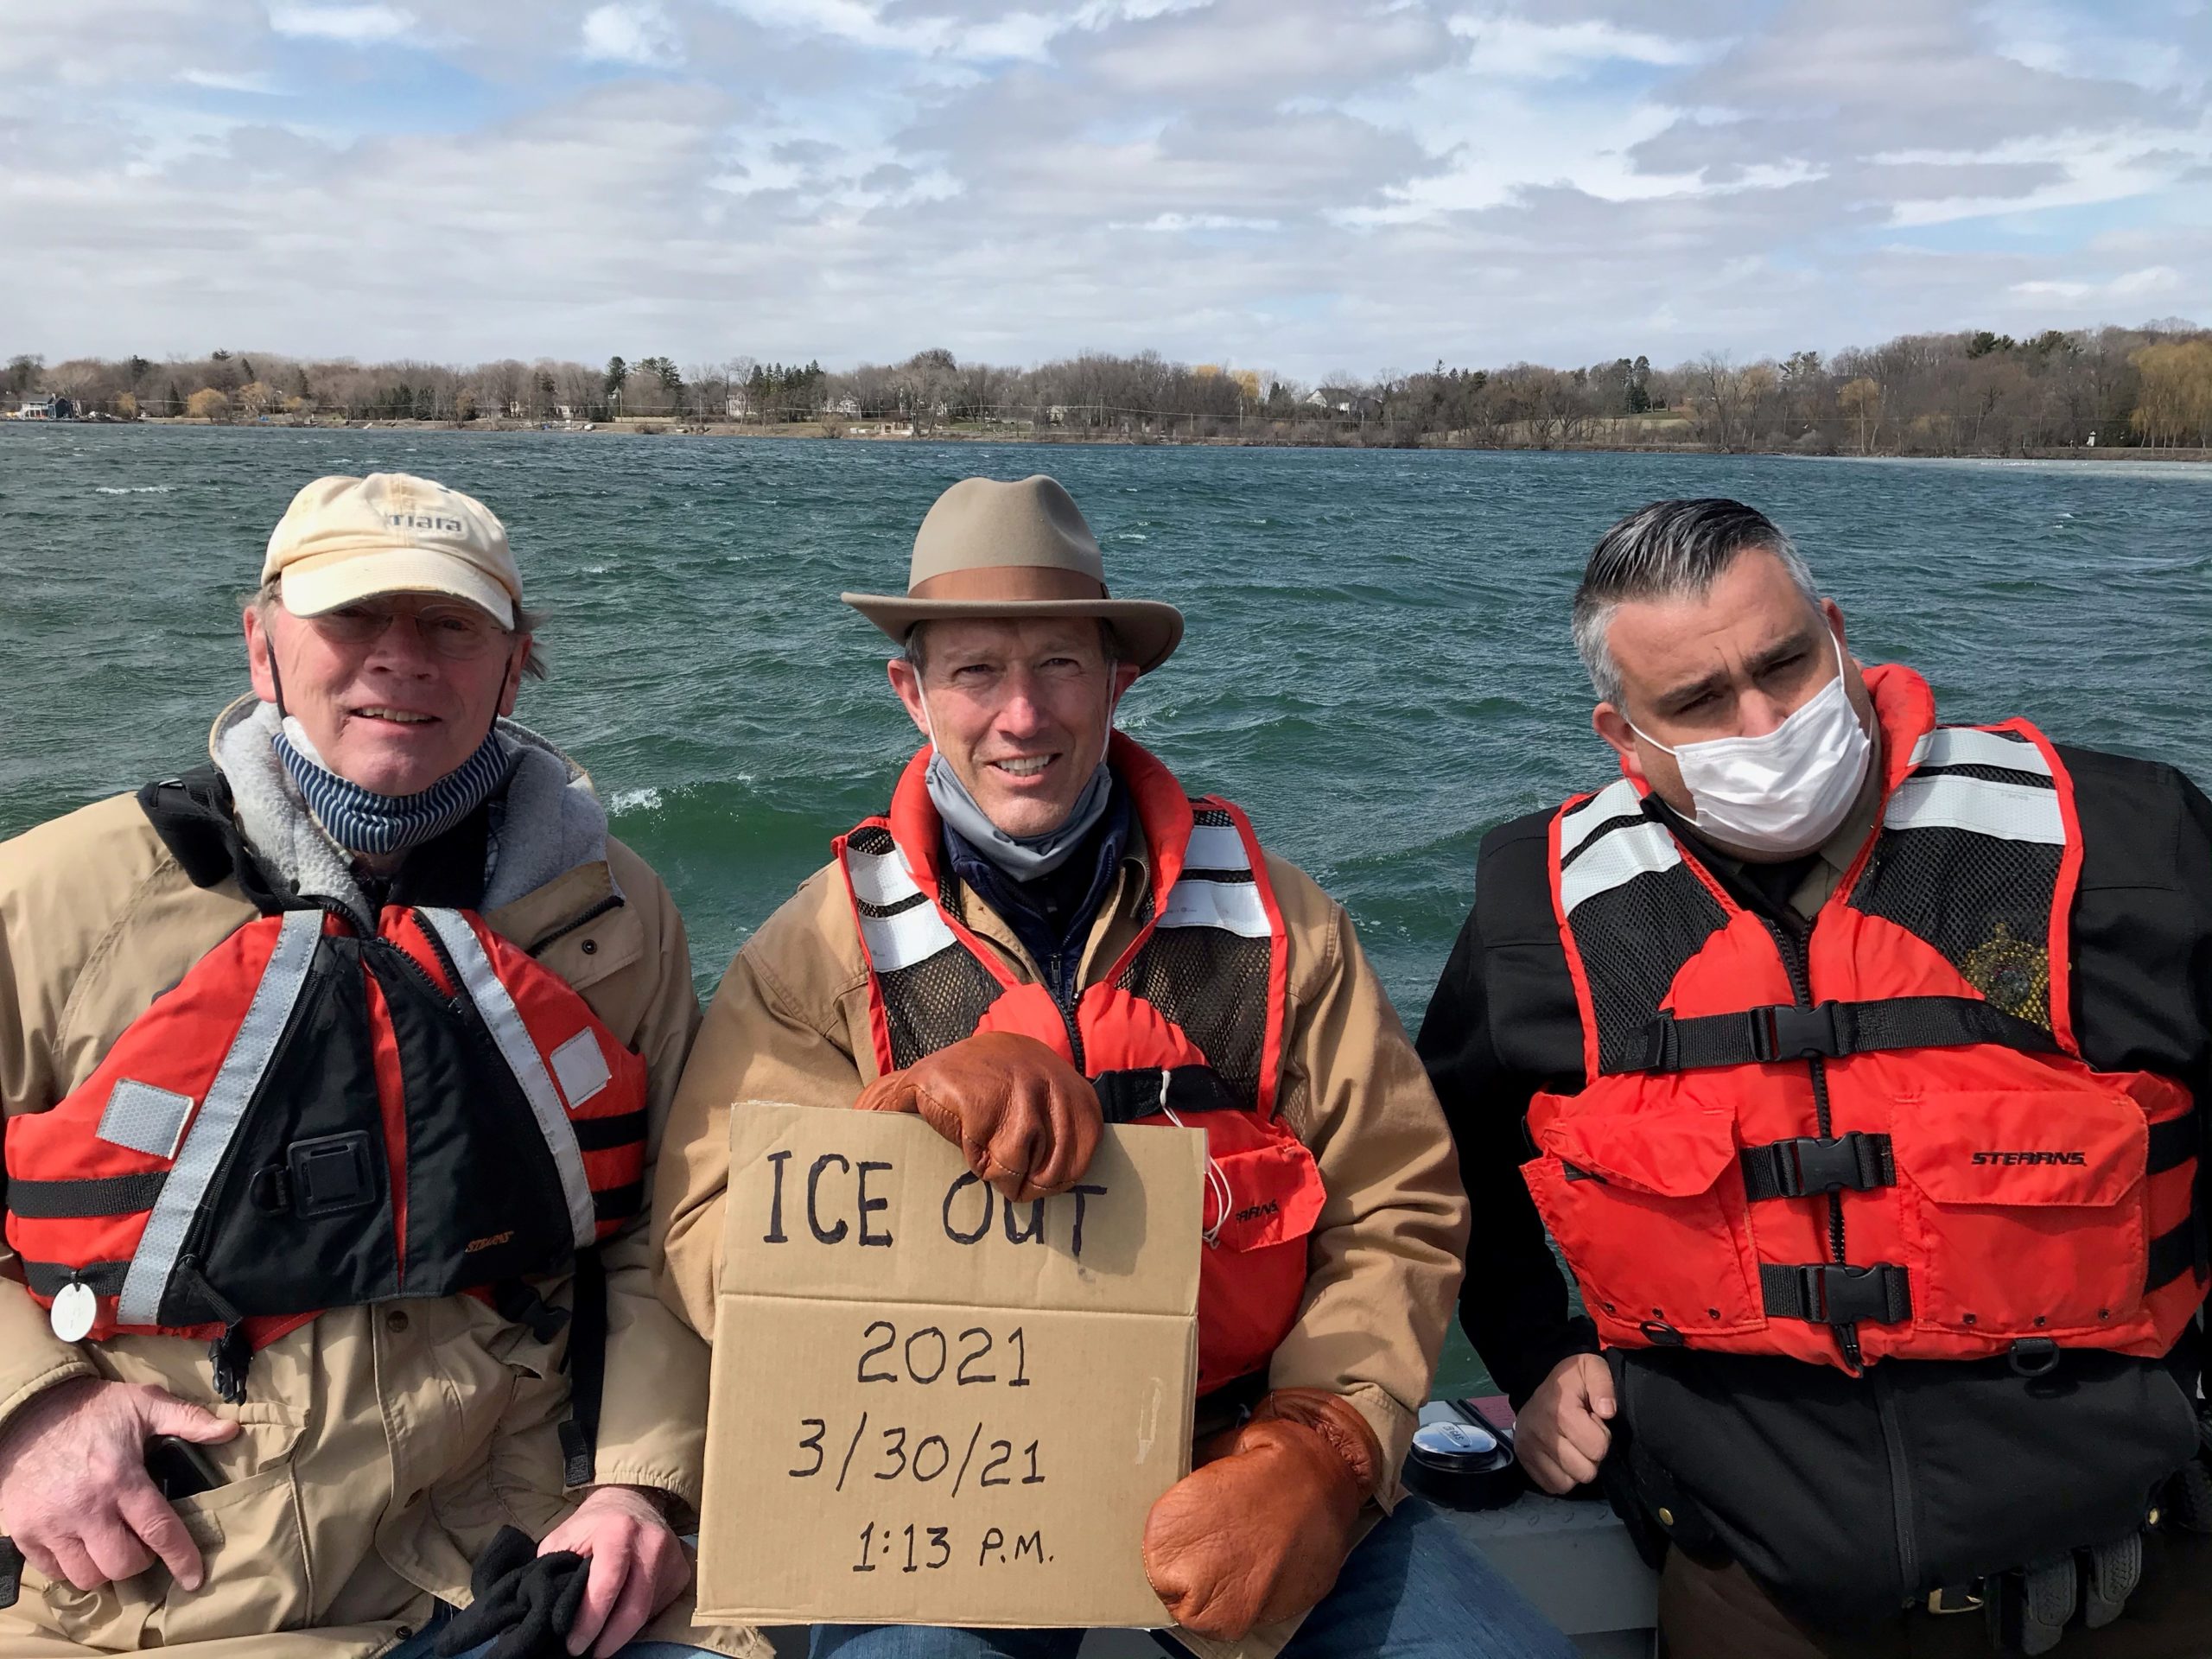 Freshwater board members Tom Skramstad (left) and Wade Campbell, with Lt. Dave Hutchinson of the Henn. Co. Water Patrol declare ice-out on Lake Minnetonka.